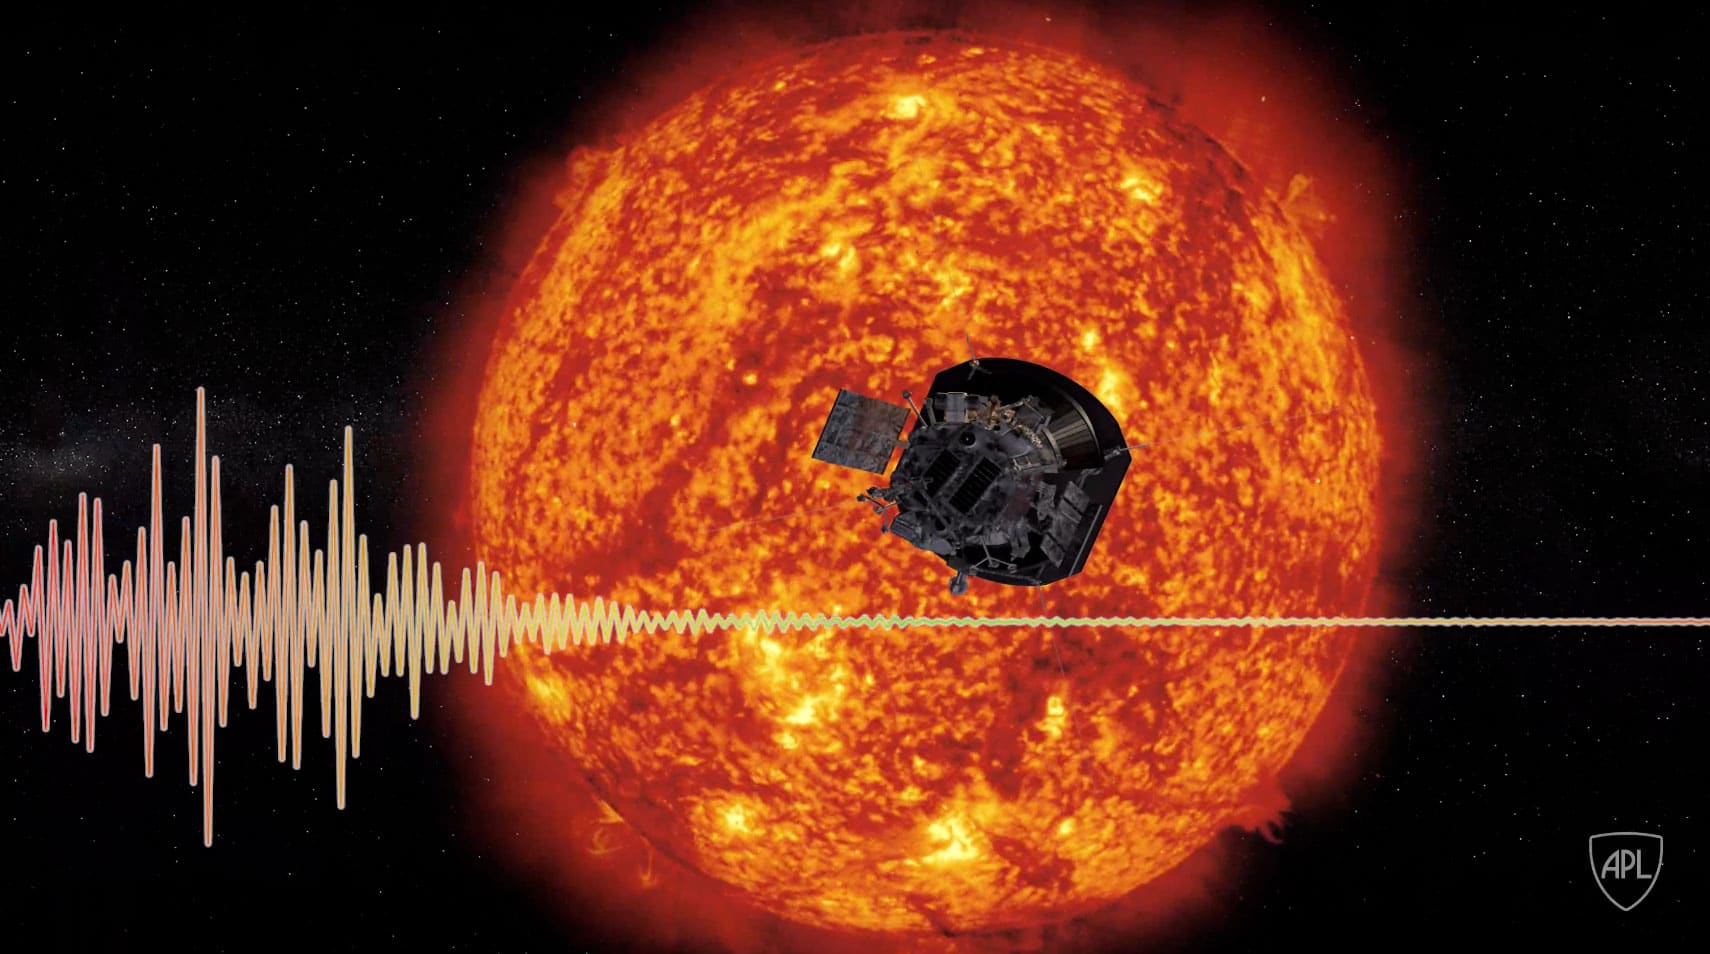 Parker Solar Probe’s FIELDS instrument can eavesdrop on the electric and magnetic fluctuations caused by plasma waves, and it can “hear” when the waves and particles interact with one another, recording frequency and amplitude information about these plasma waves that scientists can transform into sound files